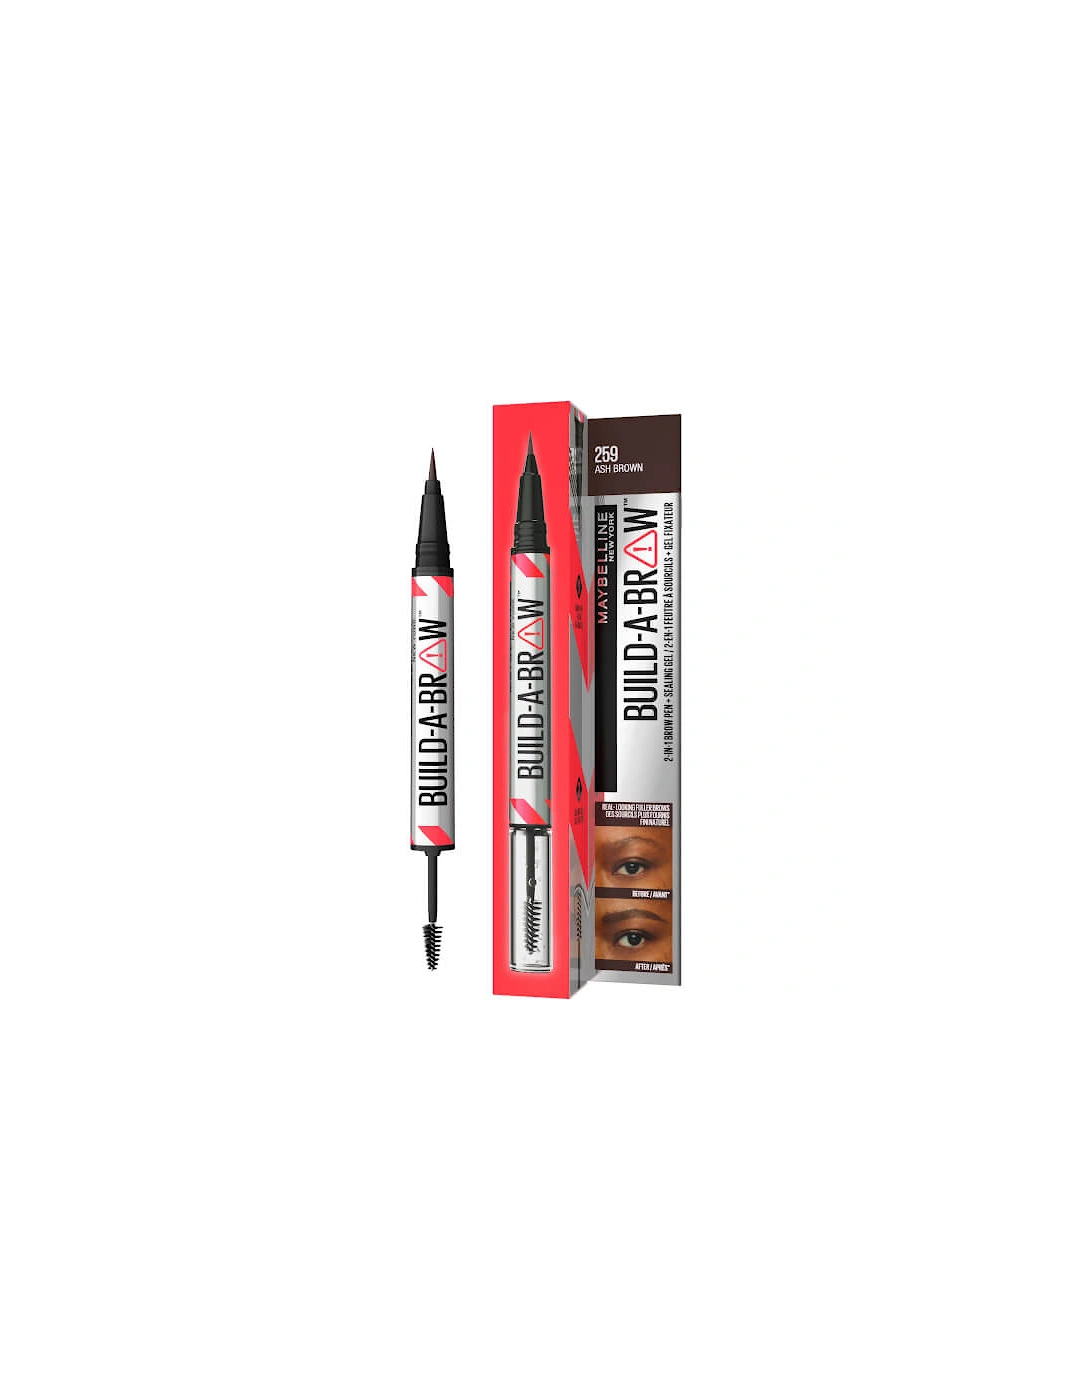 Build-A-Brow 2 Easy Steps Eye Brow Pencil and Gel - Ash Brown, 2 of 1